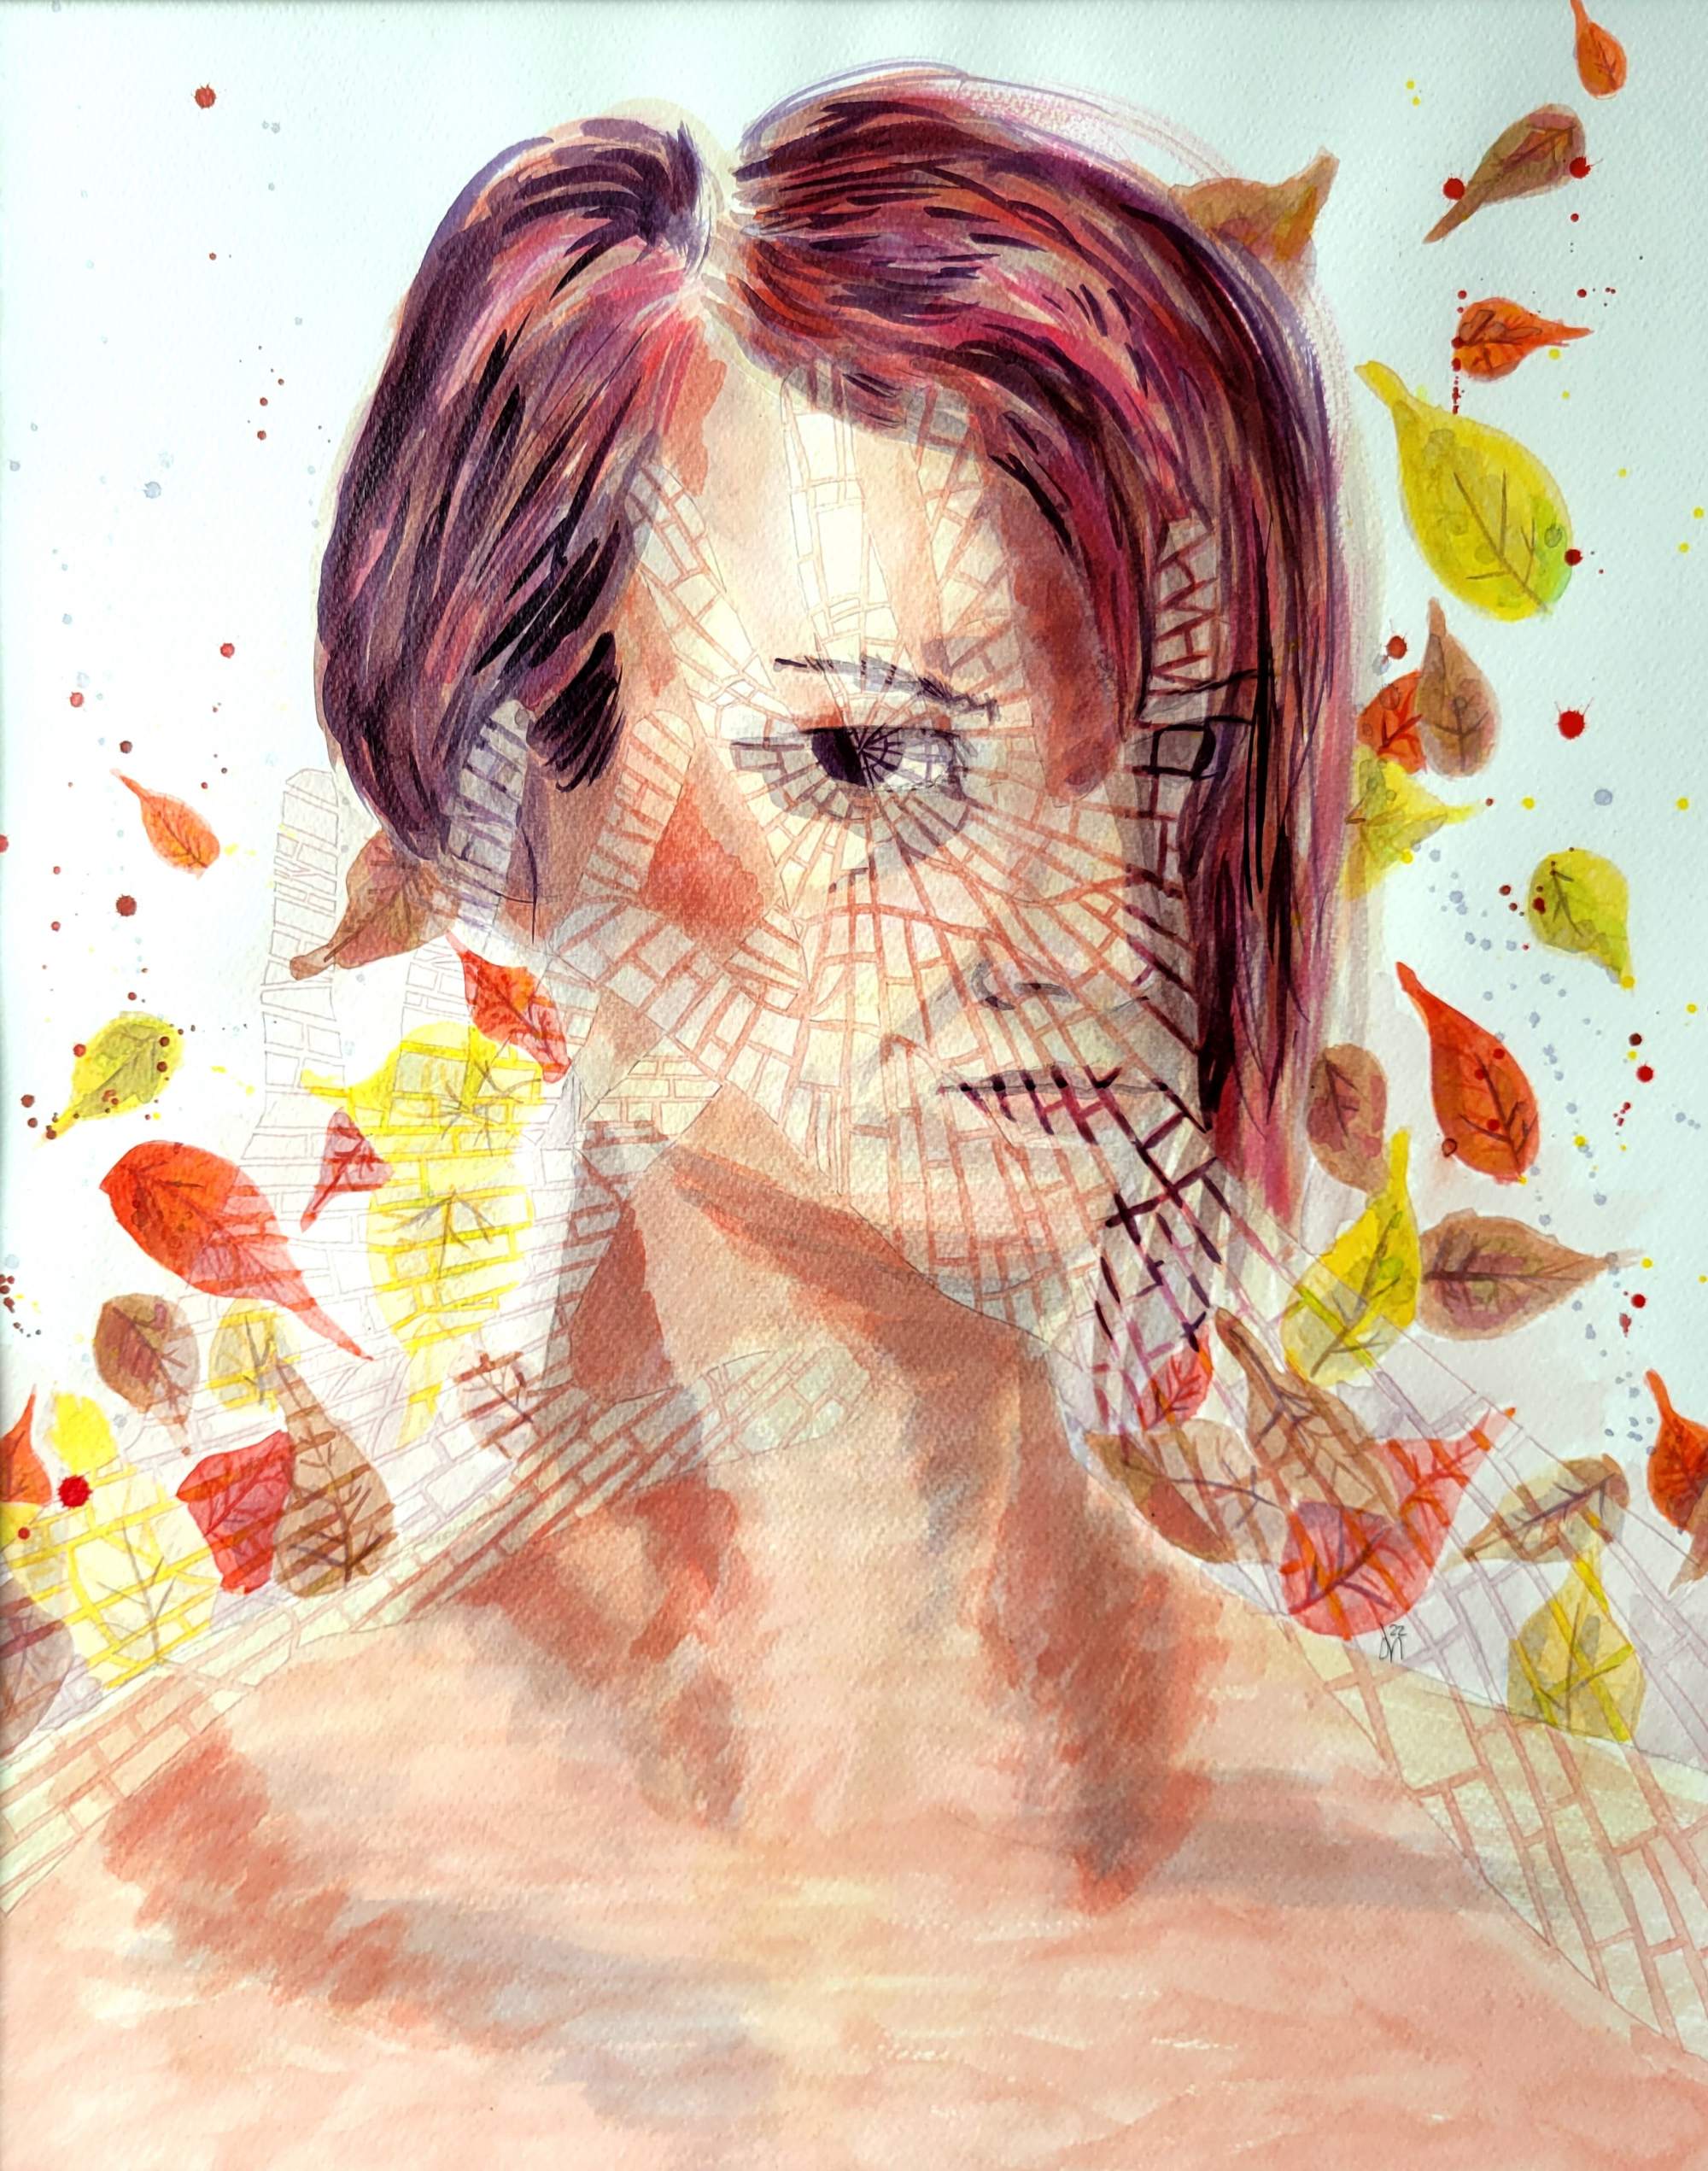 A painting of a woman peering through shattered hands